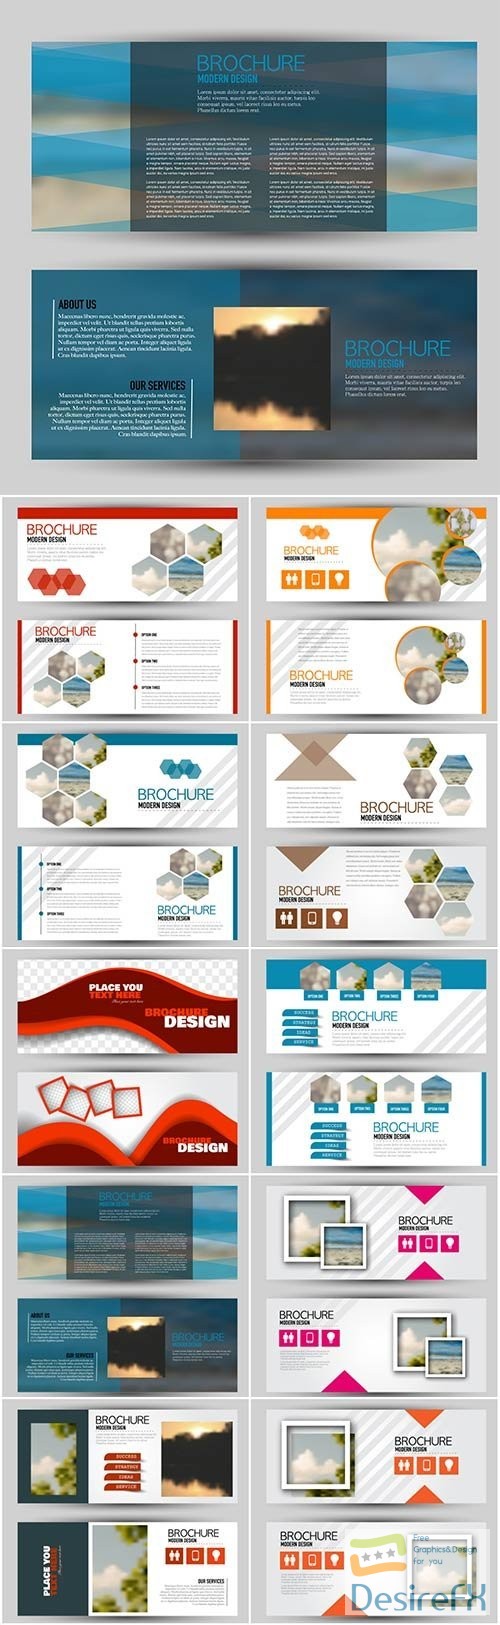 Set of banners for web and advertisement print out, vector horizontal flyer handout design # 4